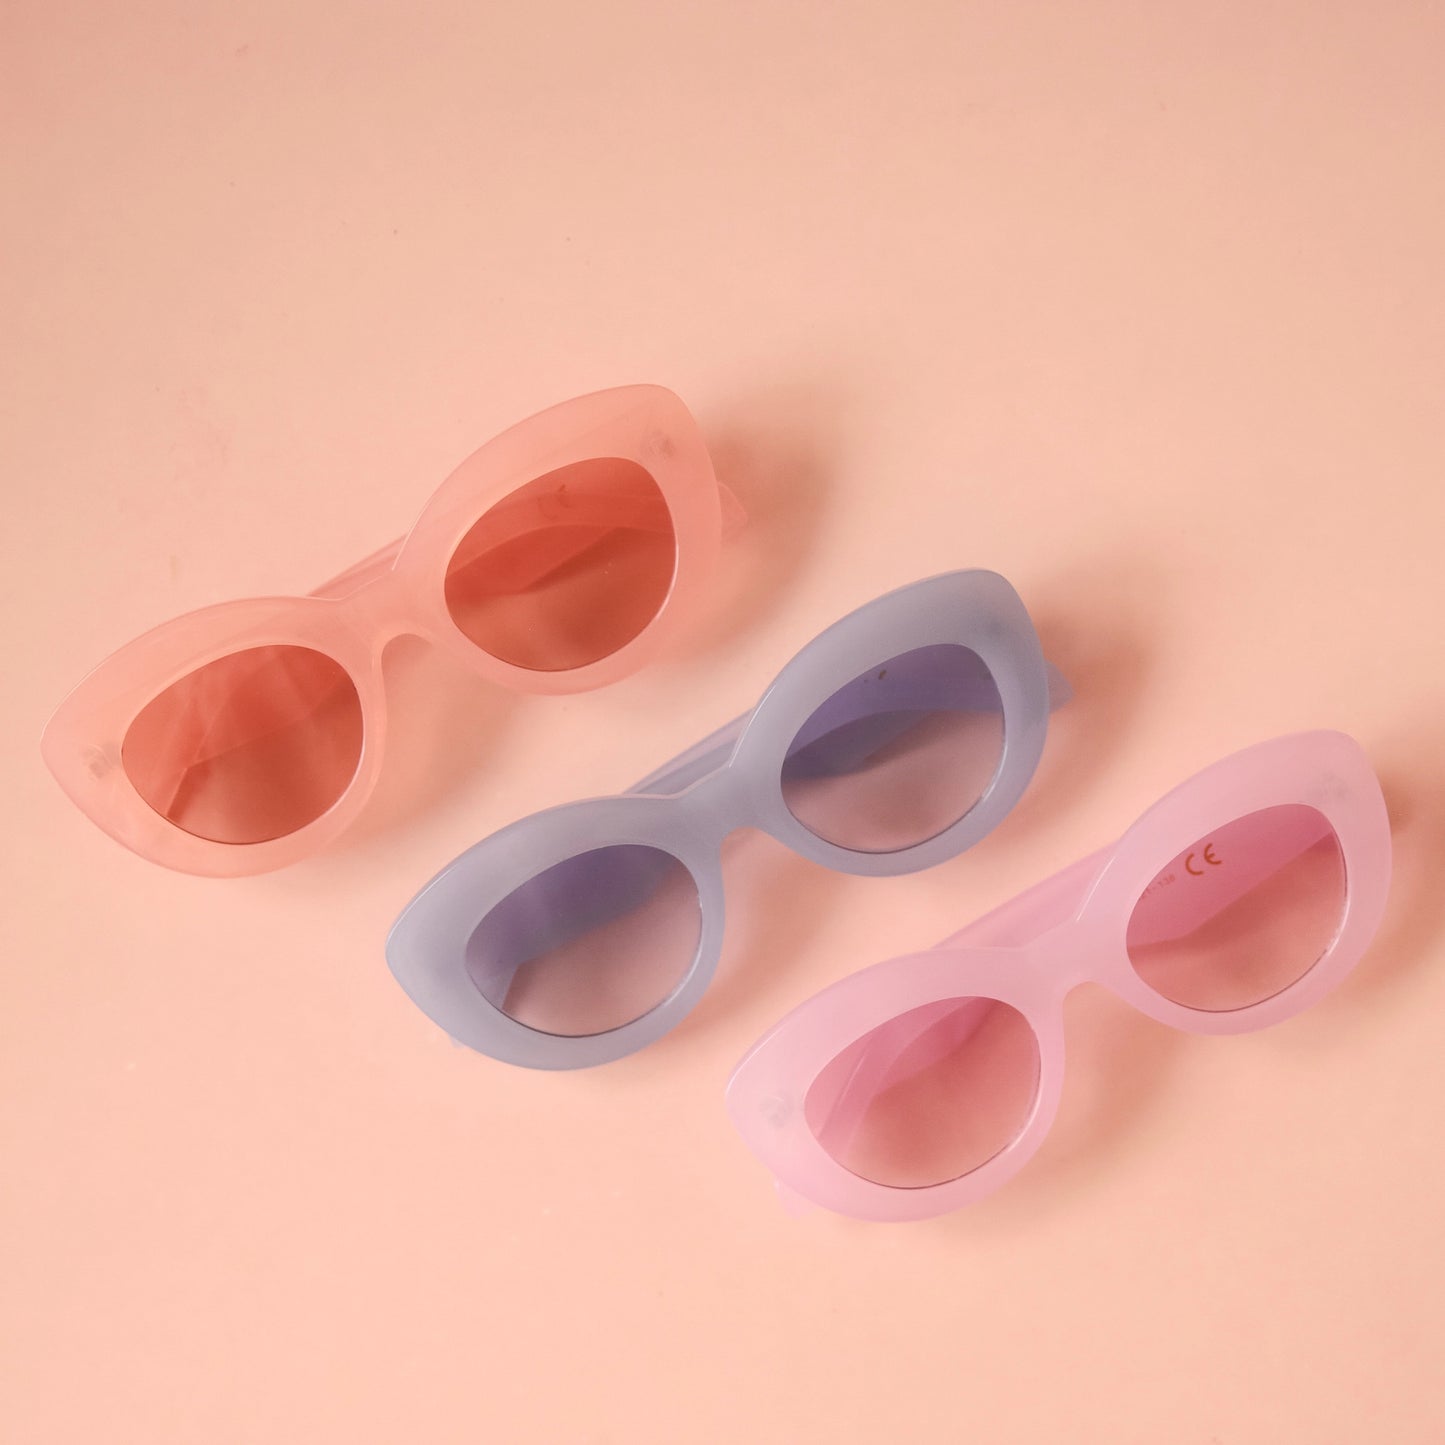 On a peachy background is a group photo of three different color options for the Gemma Sunglass frame shape.